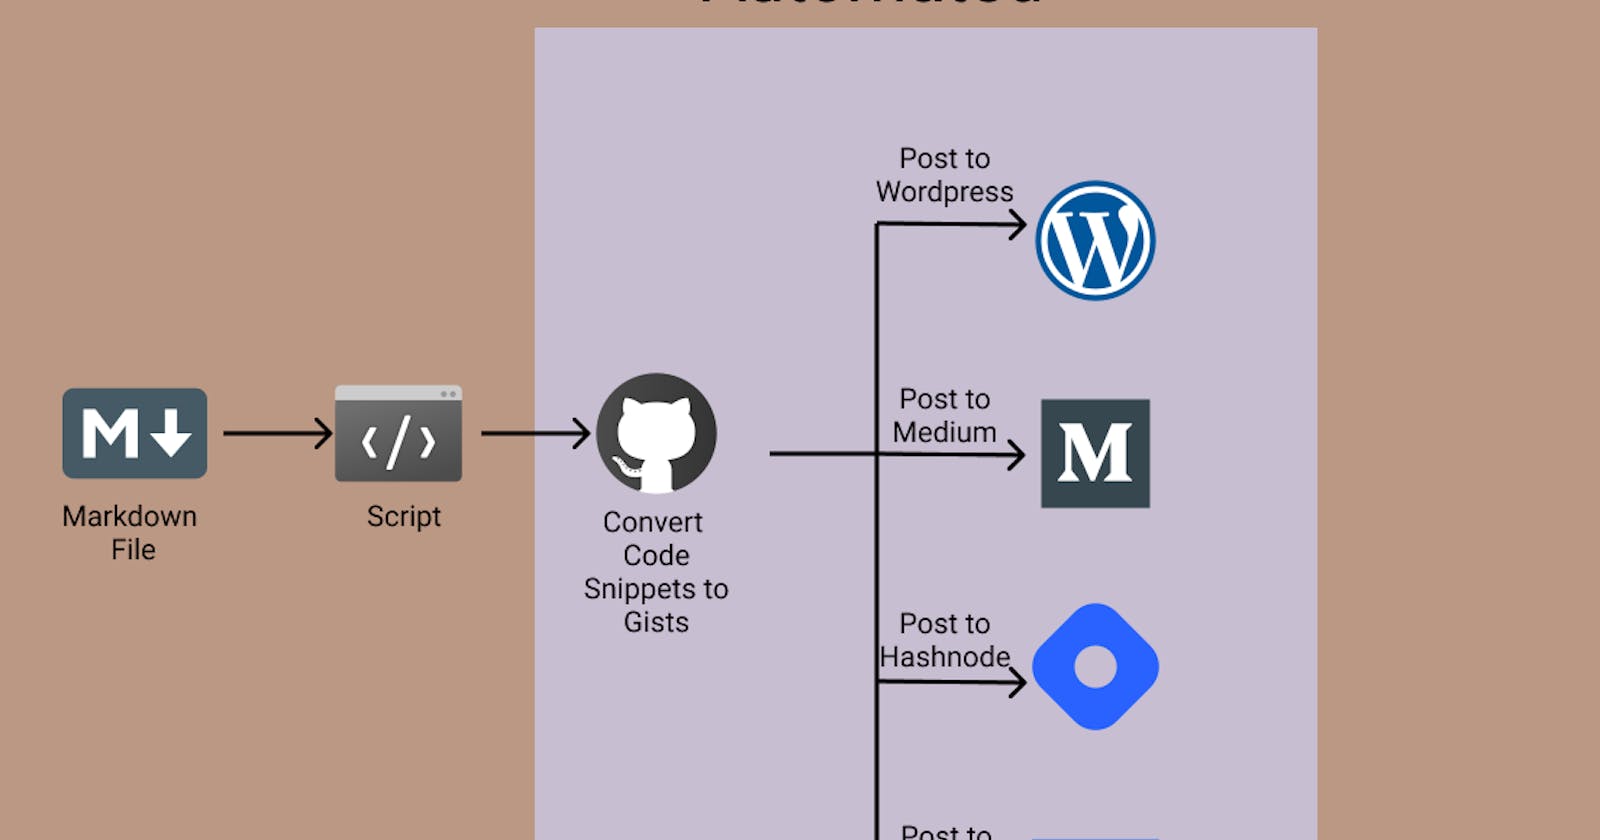 How to Use Python to Post on Popular Blogging Websites